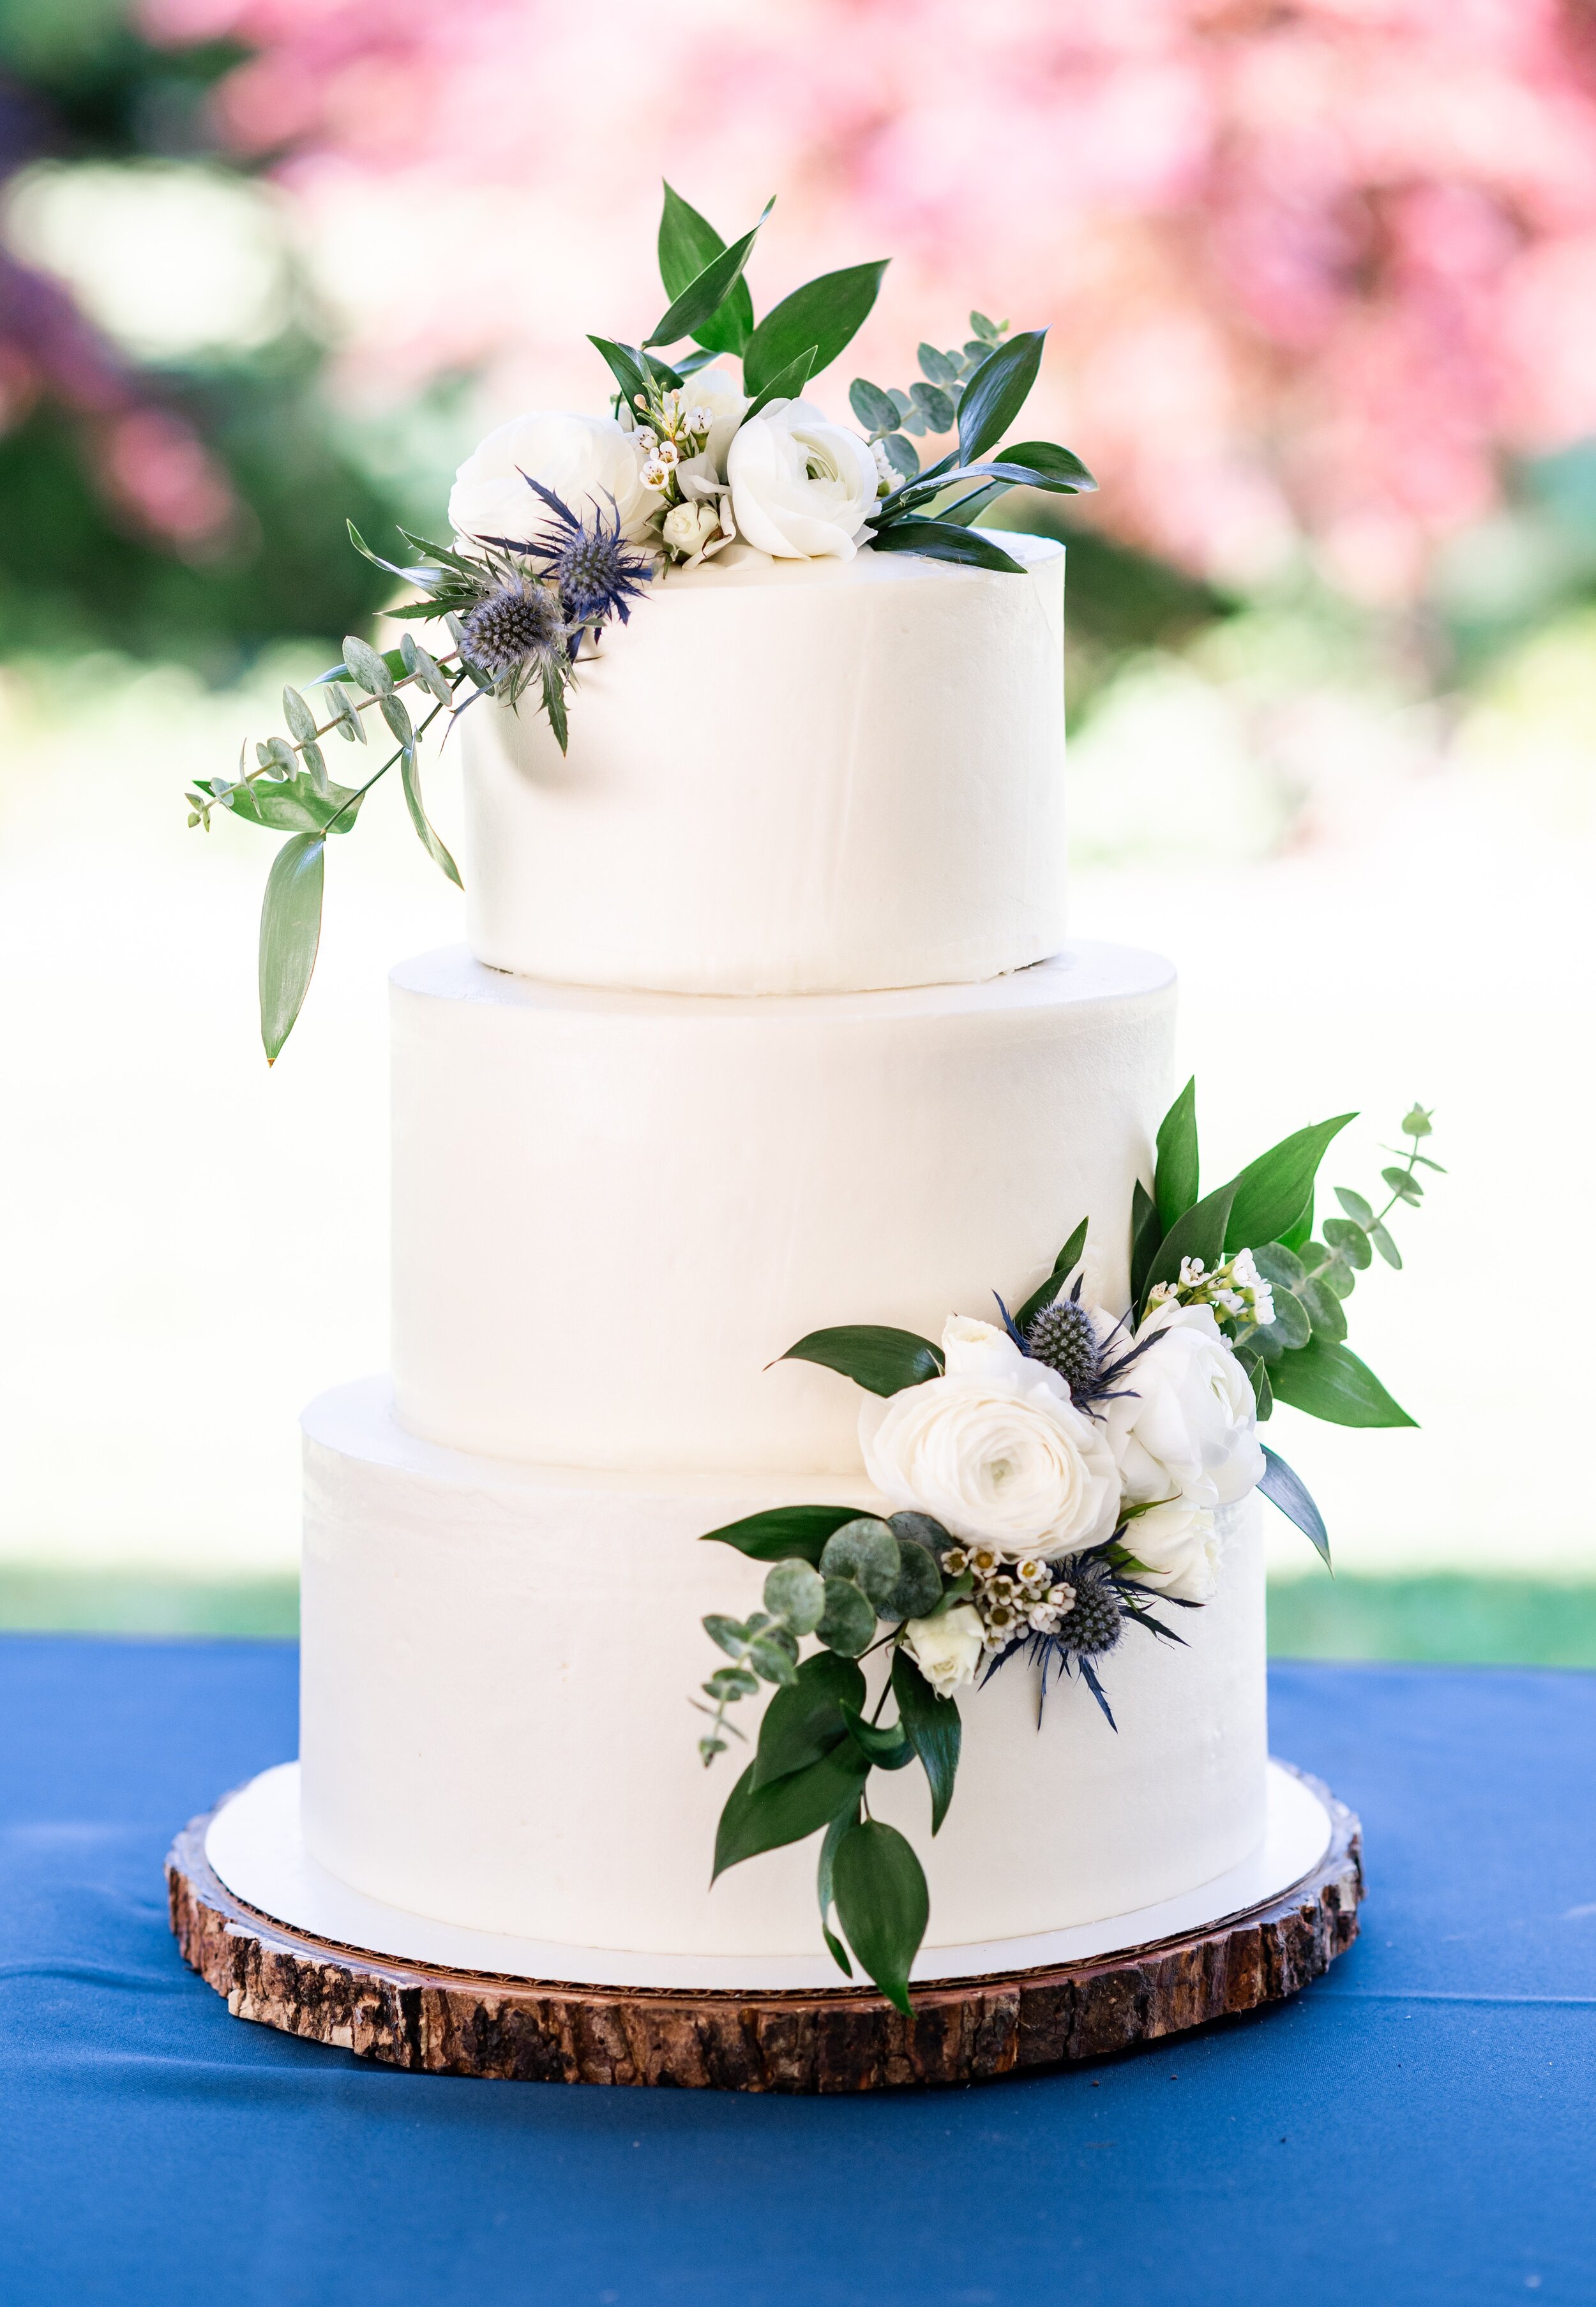 White Wedding Cake with Flowers and Gold Arbor - Harper Road Floral - Cake By Alicia - Promise Gardens Pasco Wedding Venue - Tri Cities Wedding Photographer - Morgan Tayler Photo &amp; Design